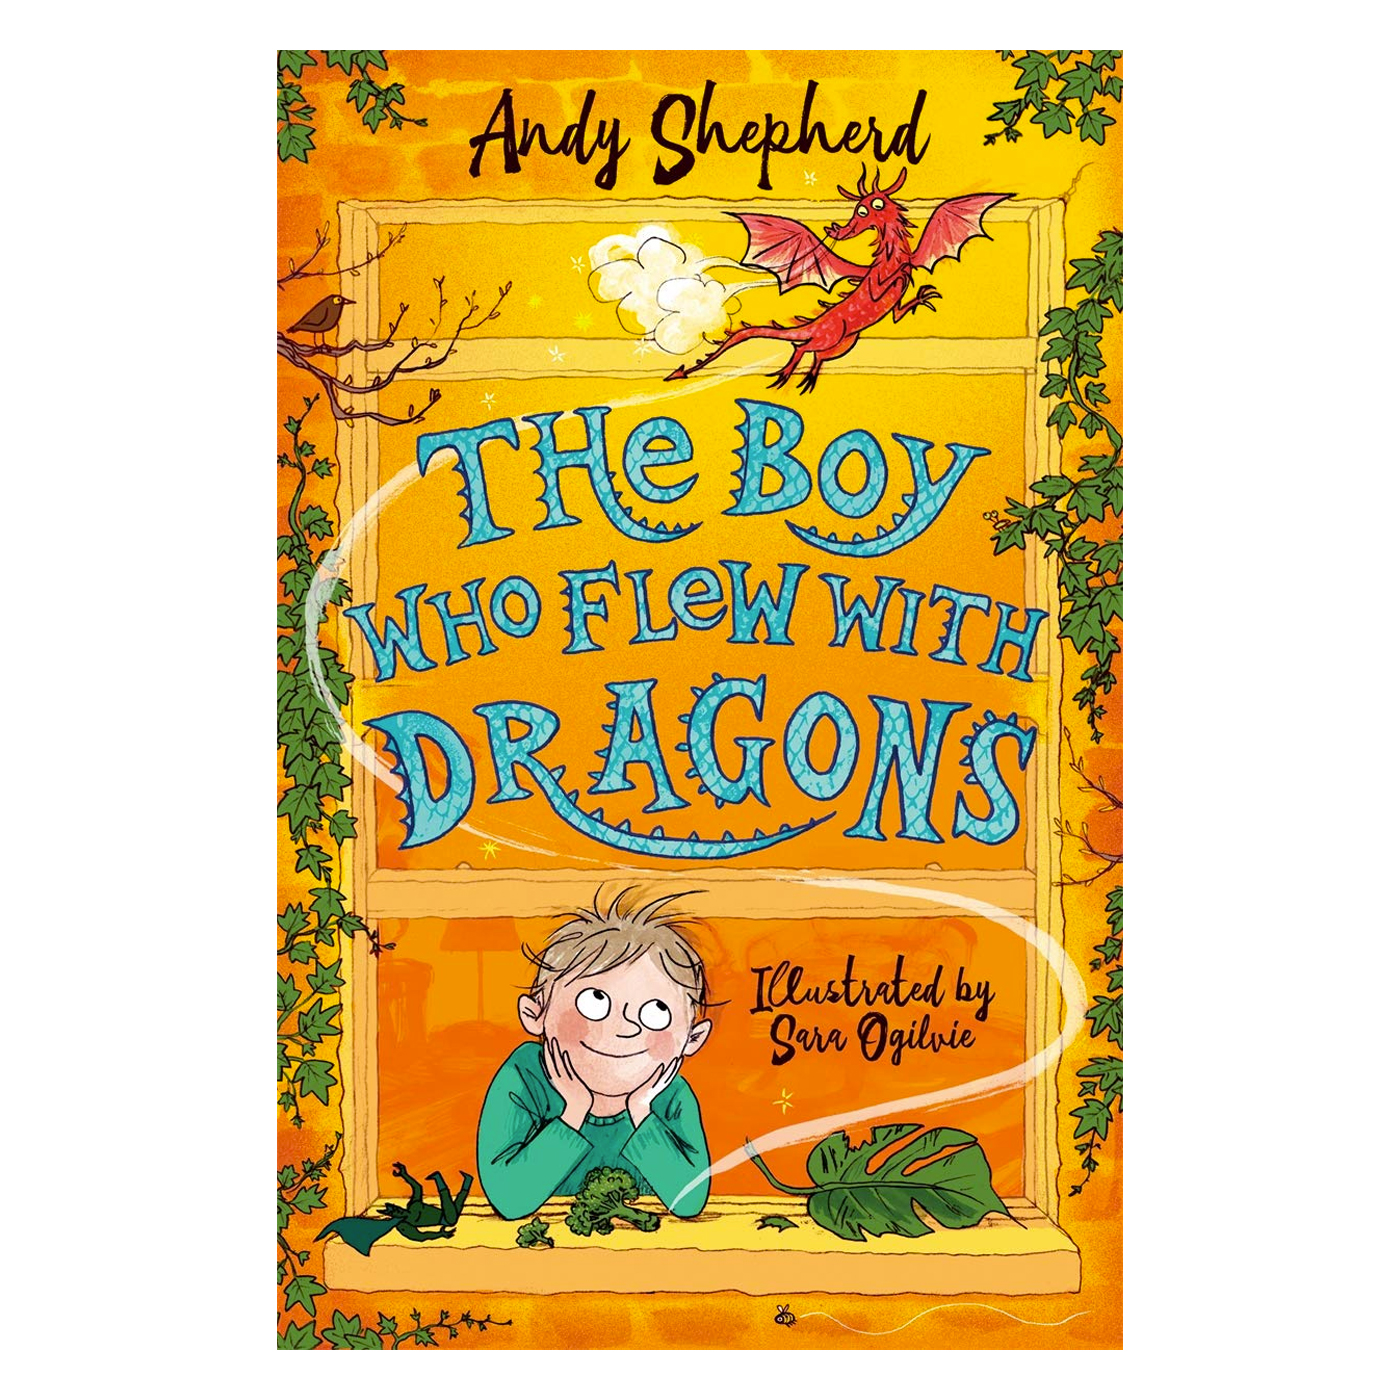  The Boy Who Flew with Dragons (The Boy Who Grew Dragons 3)